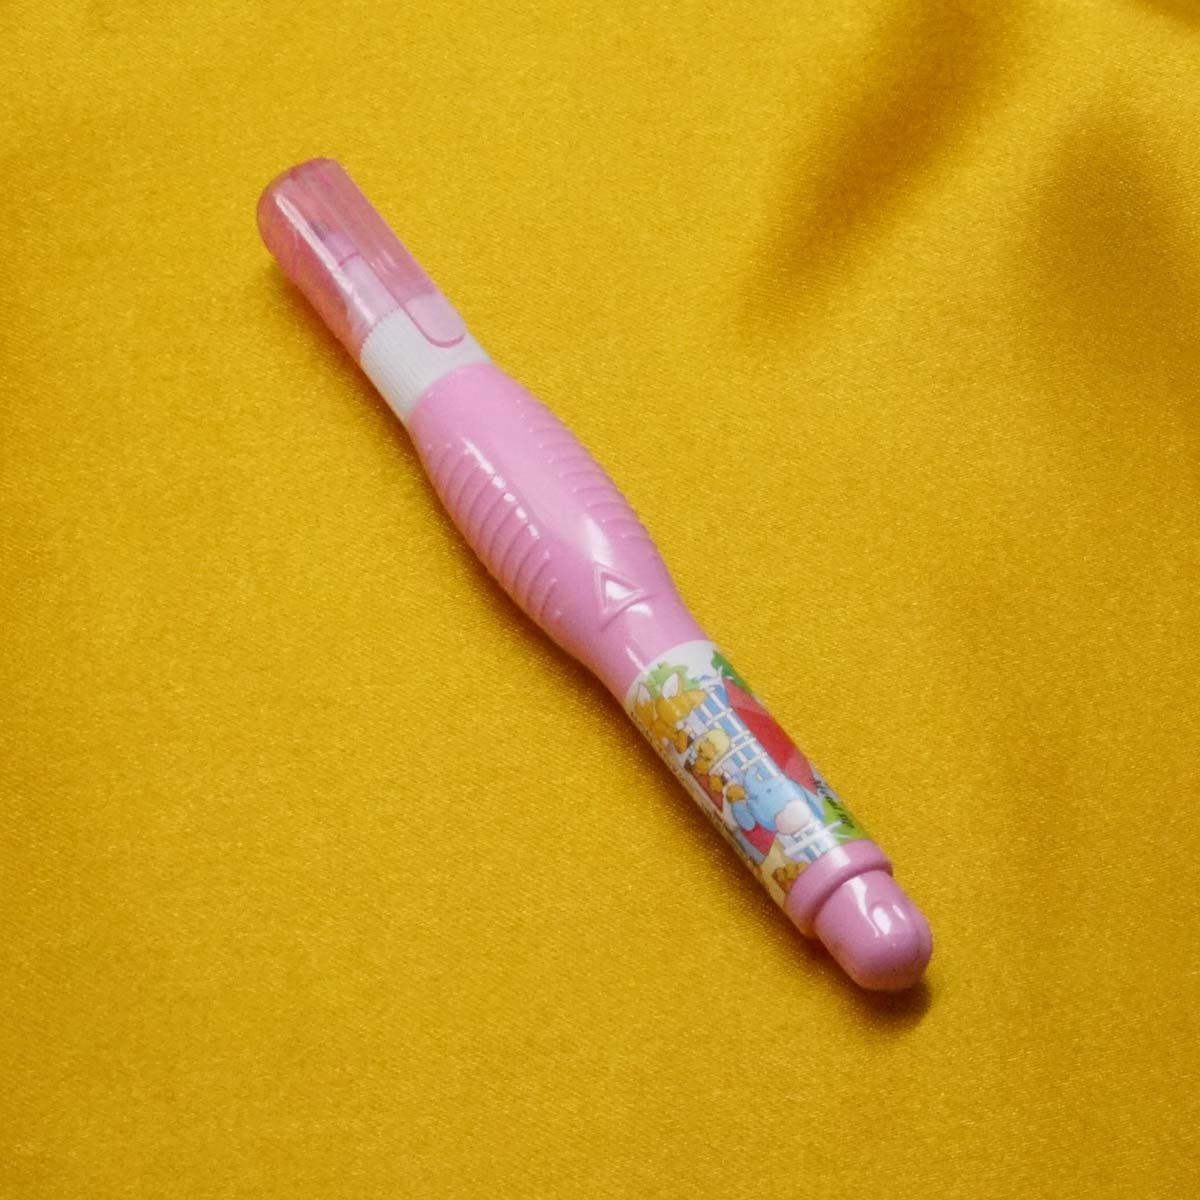 Bambalio Pink Color Body Small Size Qiuick Dry Correction Pen SKU 20839